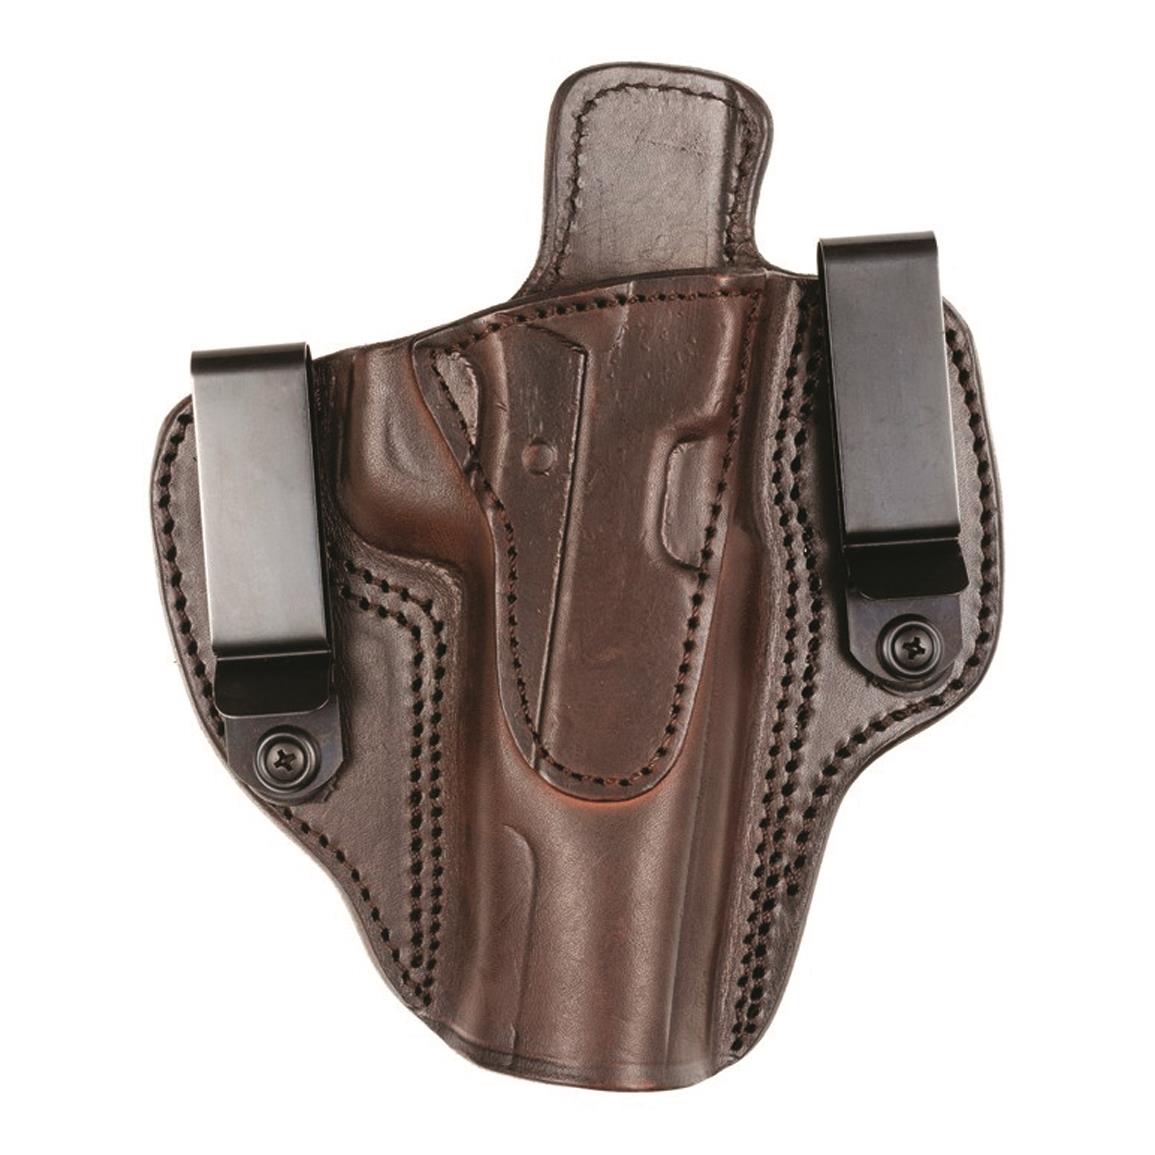 Tagua Crusader Brown Leather OWB/IWB Holster, Full-Size 1911s